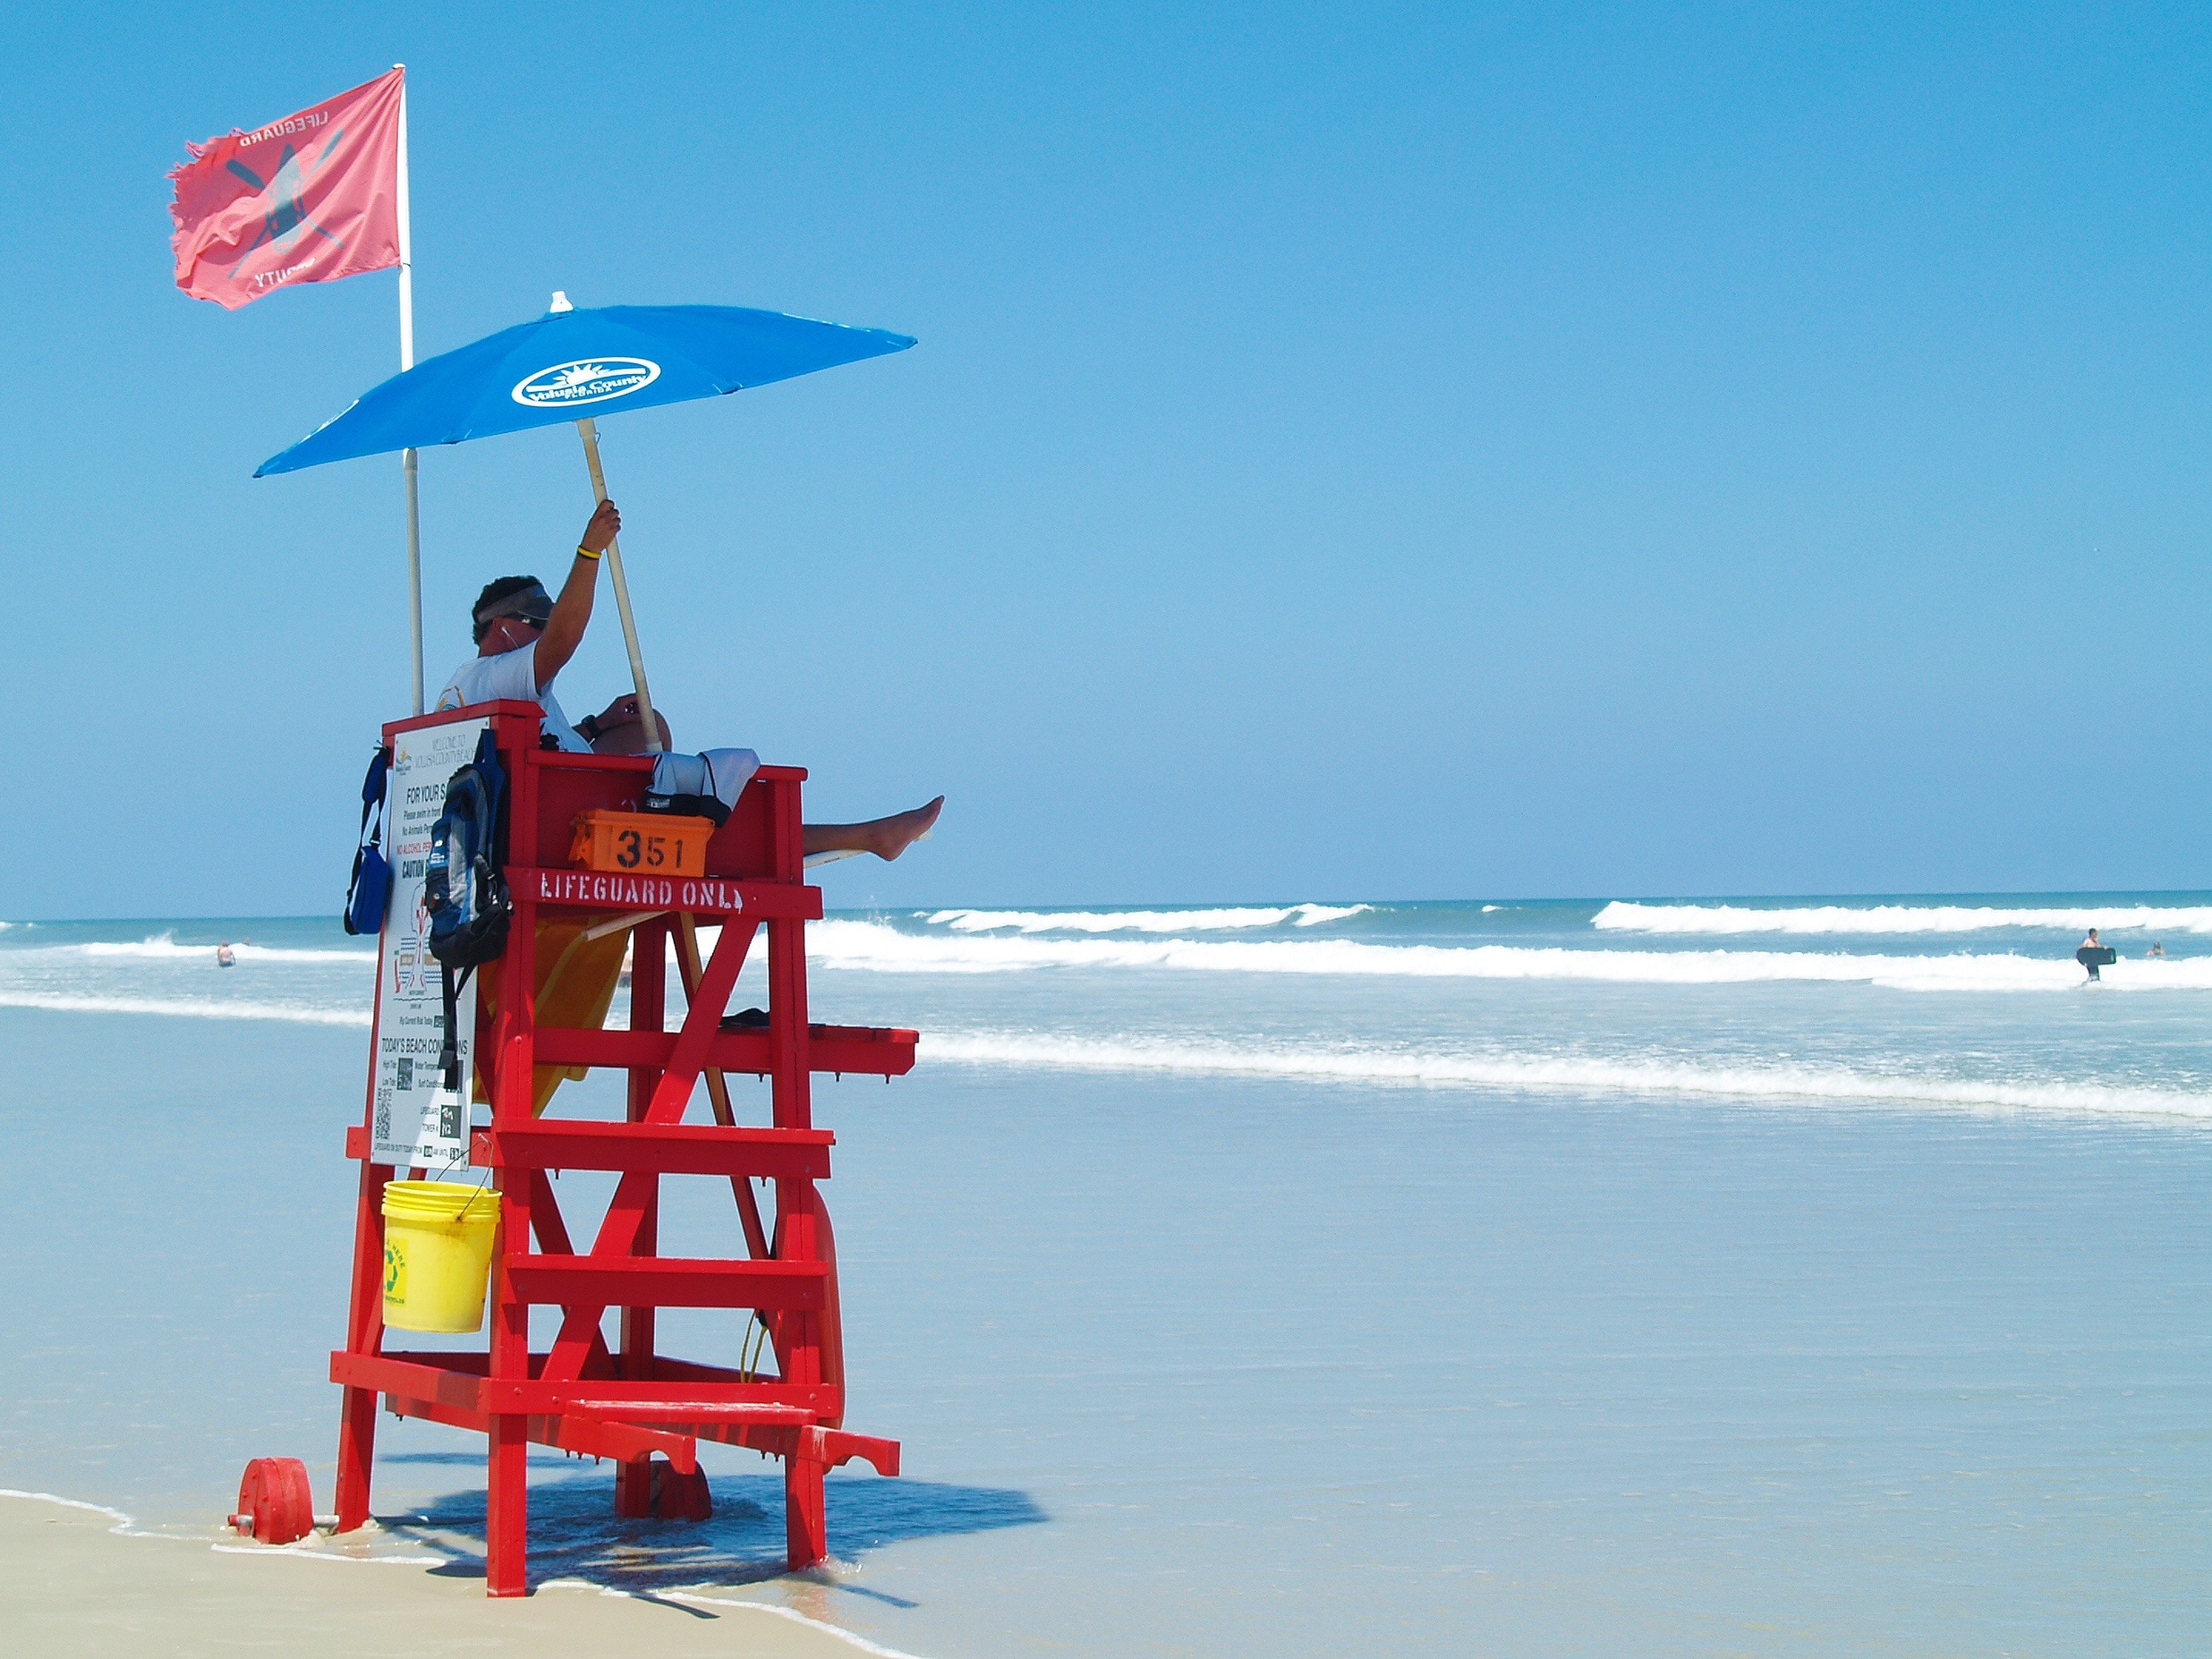 lifeguard umbrella and wooden stand